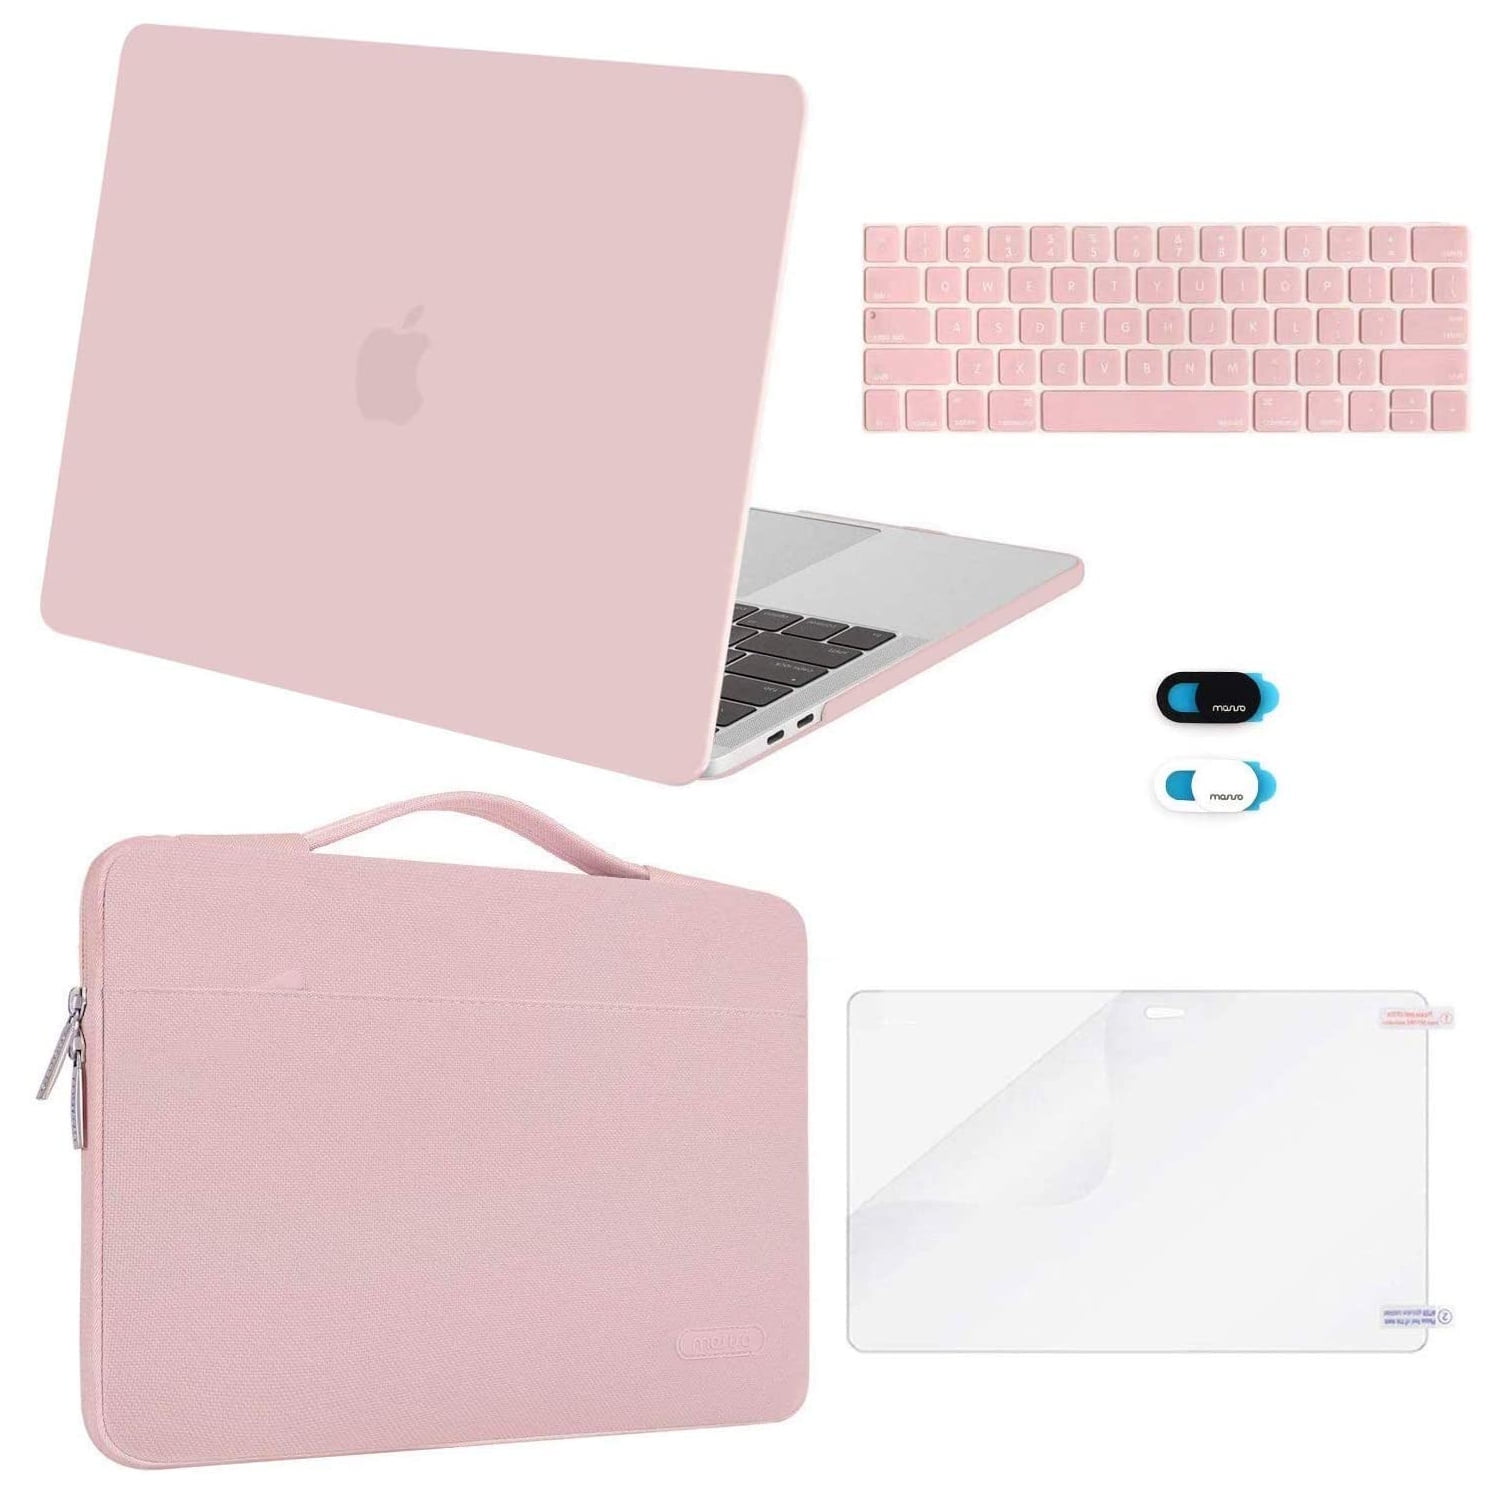 Mosiso 5 in 1 New MacBook Pro  inch Case  Release A M1 A  A A A A A, Hard Shell Case&Sleeve Bag for Apple